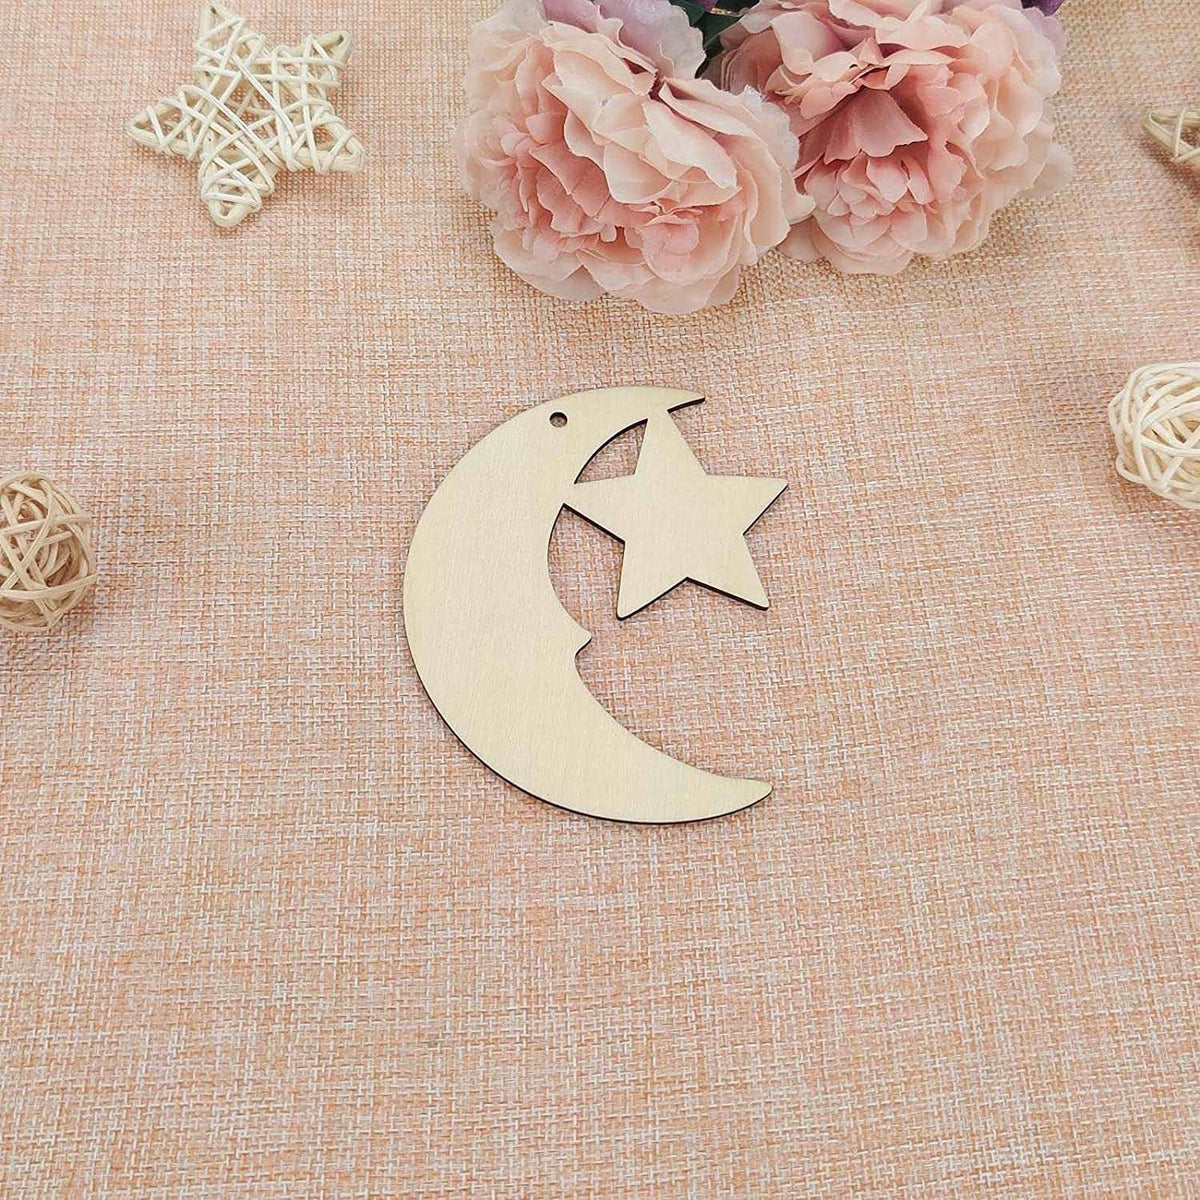 Haoser 10 Pack eid Moon décor,Stars and Moon Decoration, Wooden Moon Star Shaped Hanging Ornaments with Hole for Ramadan Decoration - Haoser